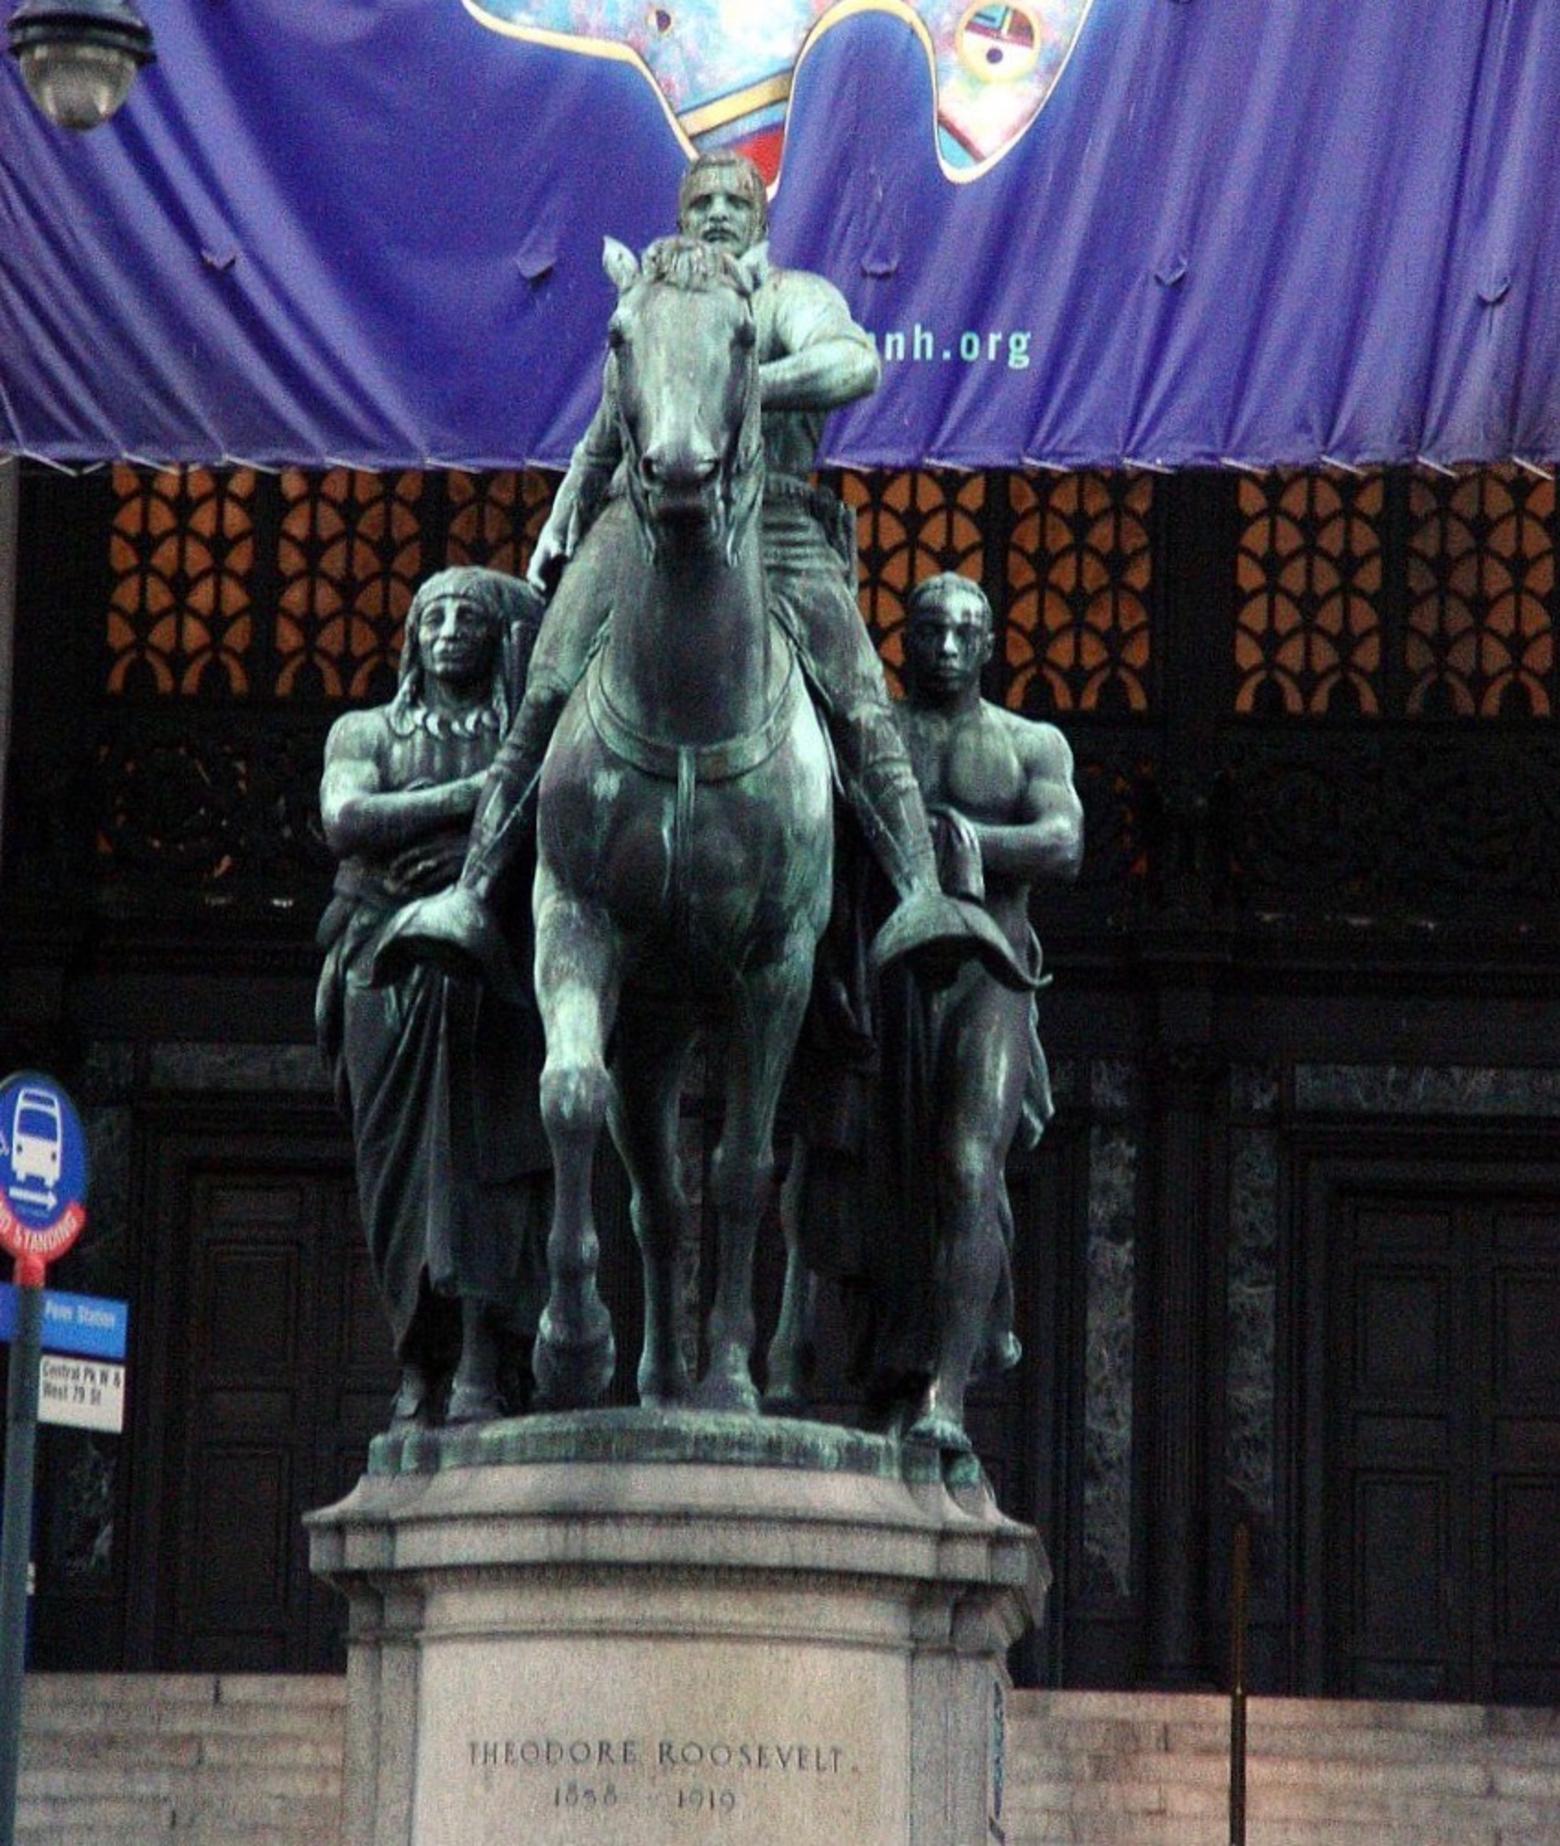 The American Museum of Natural History in New York City recently announced it was taking down an equestrian statue of Theodore Roosevelt, saying it is both racist and demeaning toward people of color.  The bronze features Roosevelt on horseback with an indigenous man walking below on one side and an African-American man on the other. In this essay, the Sierra Club's Michael Brune doesn't make specific mention of Roosevelt, but the same charges leveled against Muir, of having racist attitudes toward people of color and connections to the eugenics movement, also apply to TR who is also considered a lion of the American conservation movement. Photo by Martin Durrsschnabel via Creative Commons CC-BY-SA-2.5